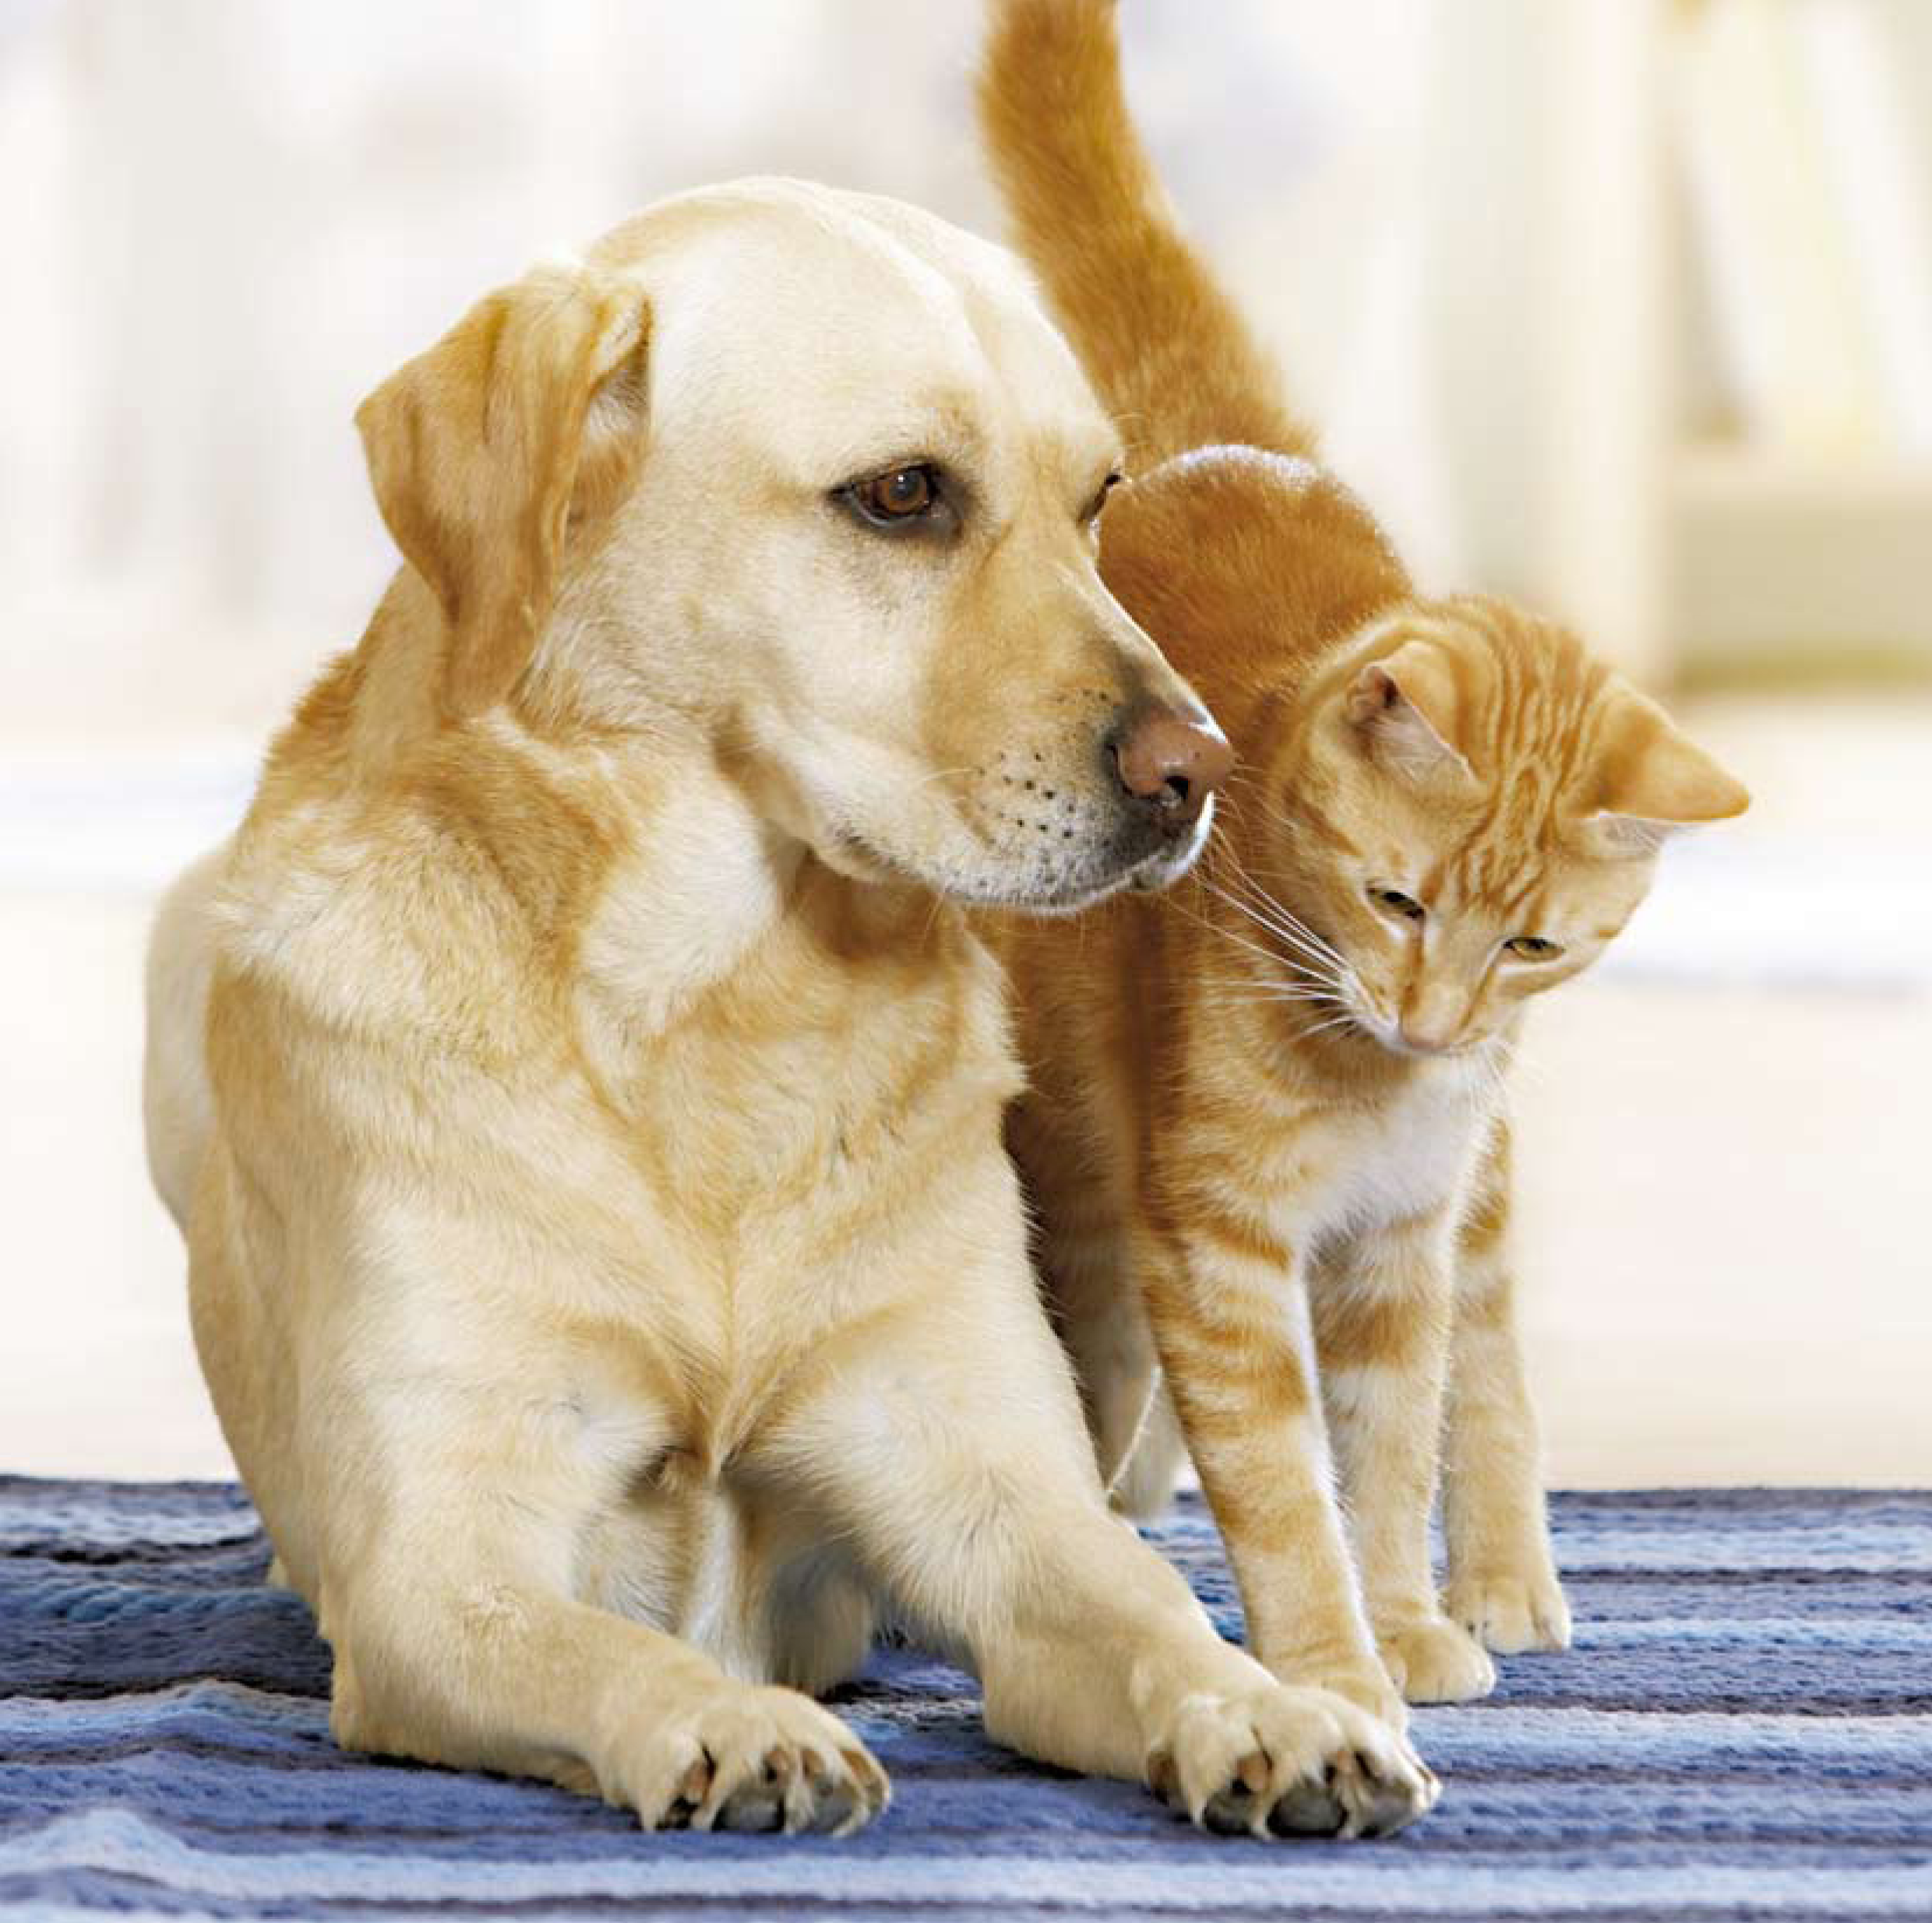 Natural care for high-quality pet food ingredients